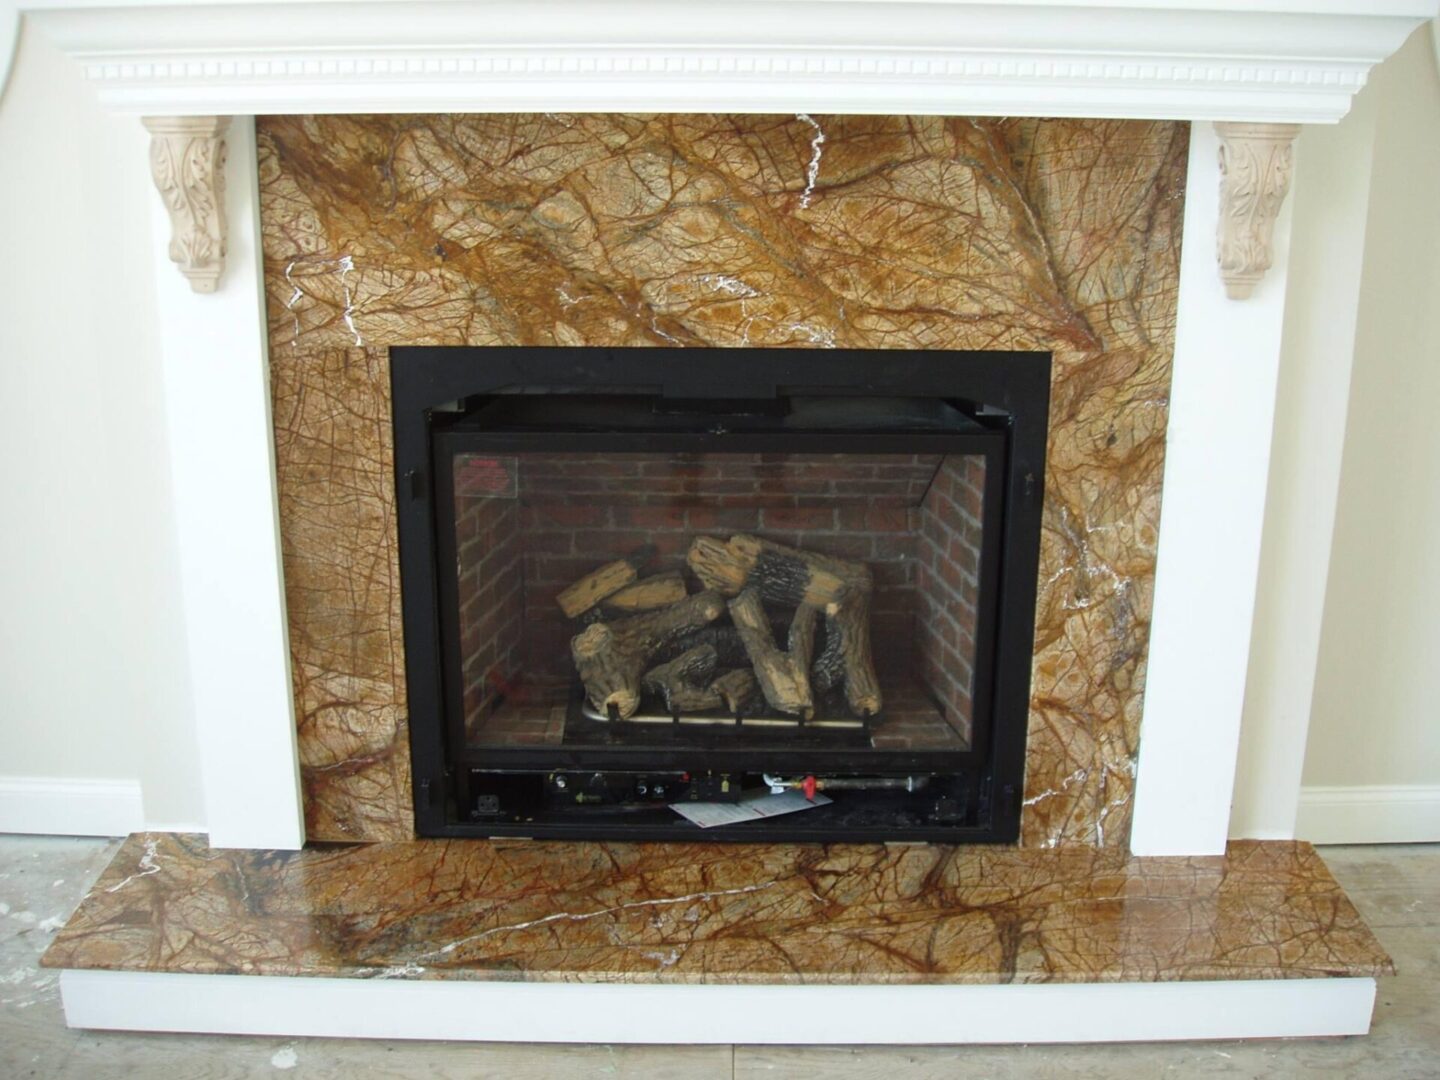 A fireplace with wood burning in it.